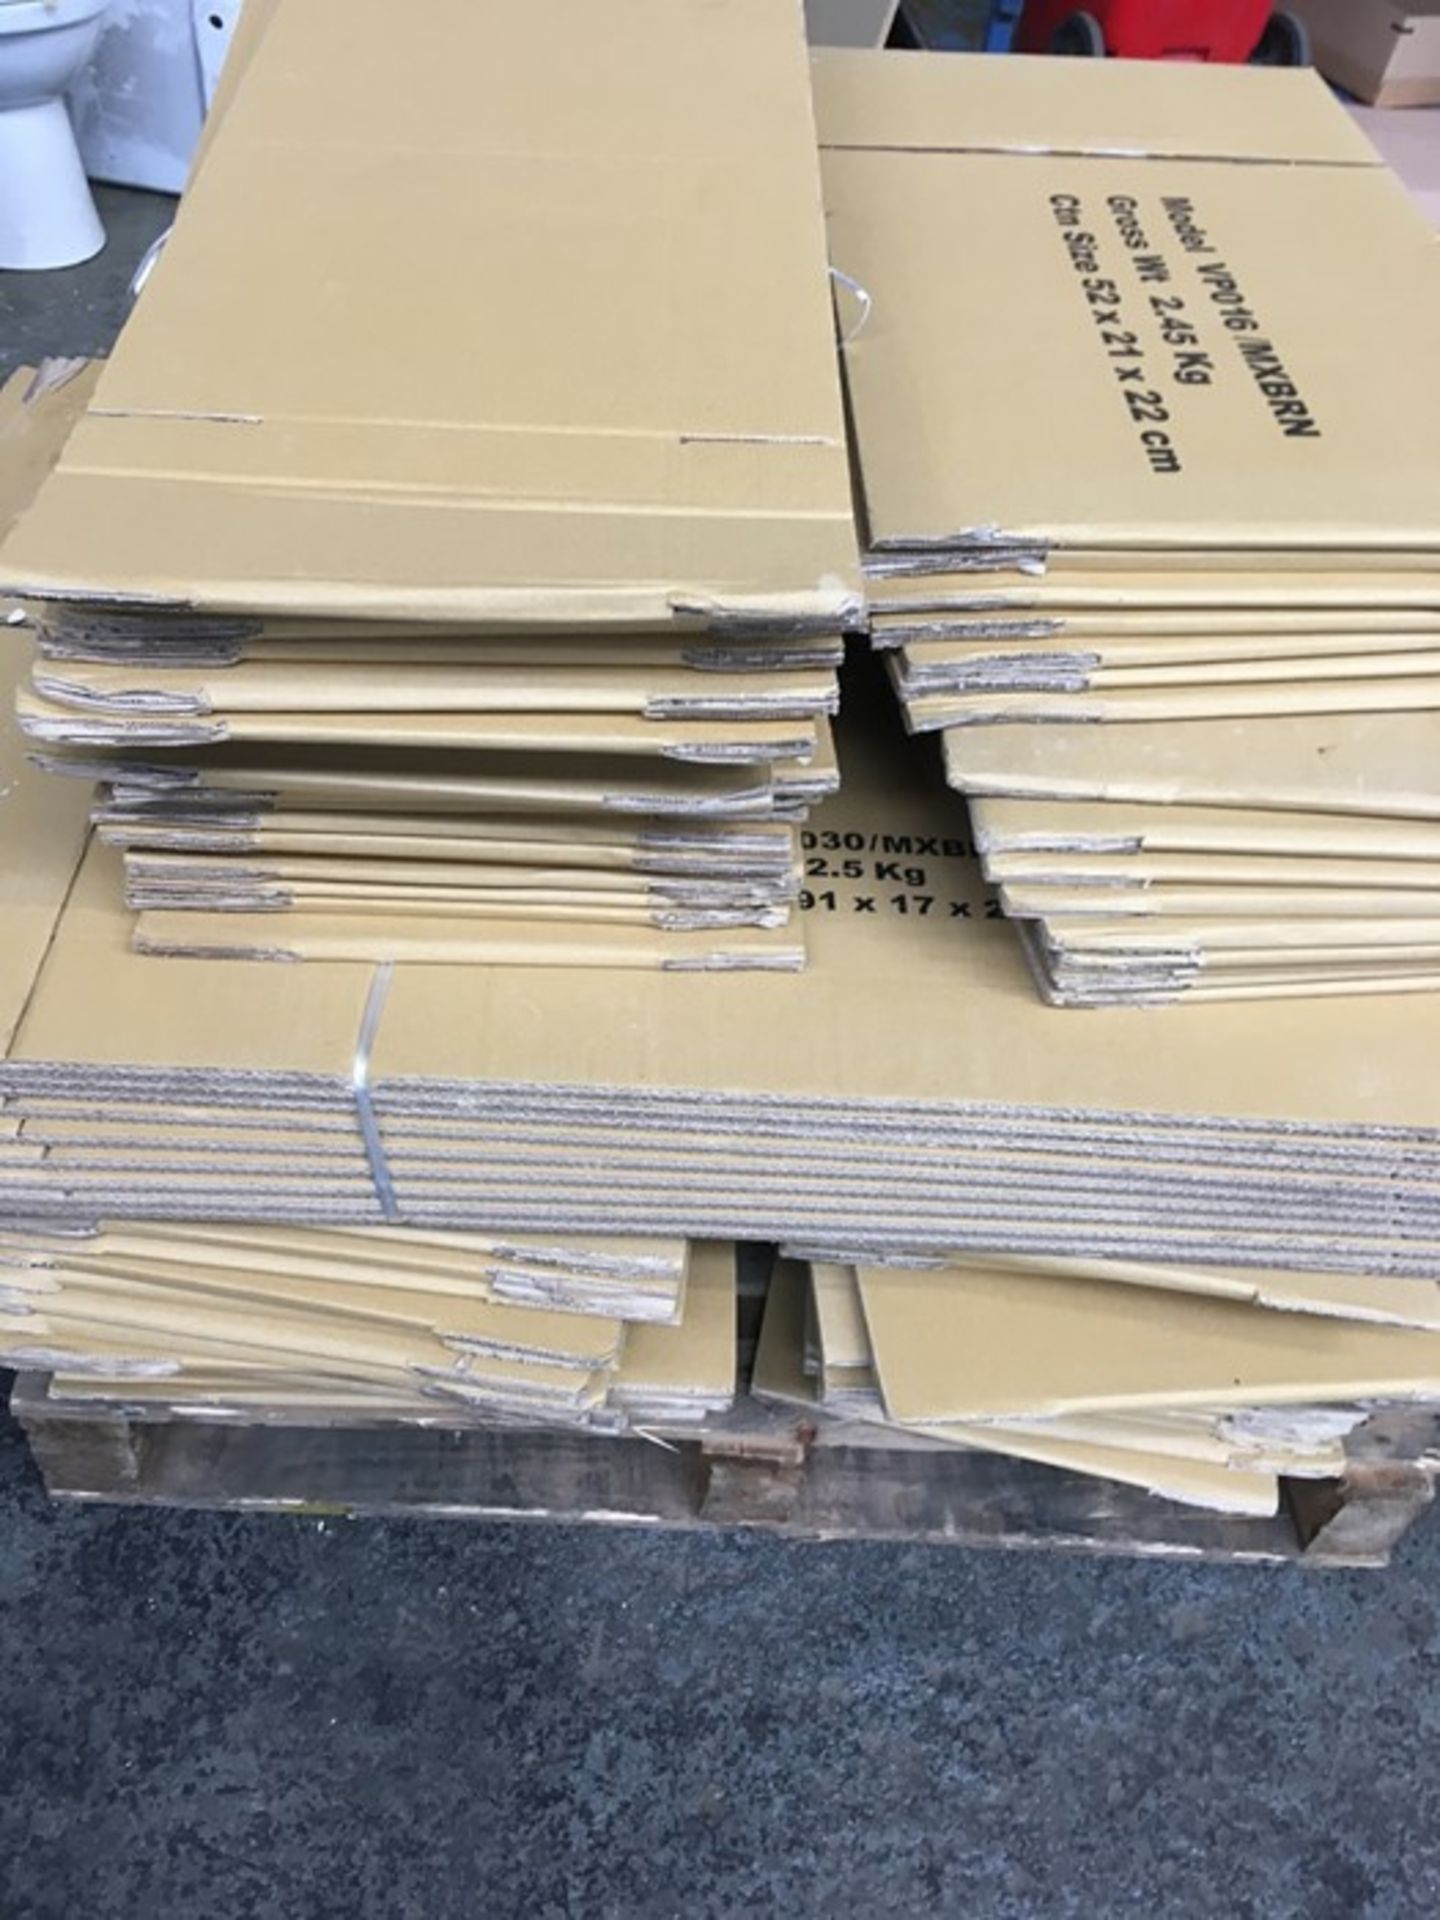 1 LOT TO CONTAIN ASSORTED CARDBOARD BOXES / COLOURS, SIZES AND CONDITIONS VARY / PN - 312 (PUBLIC